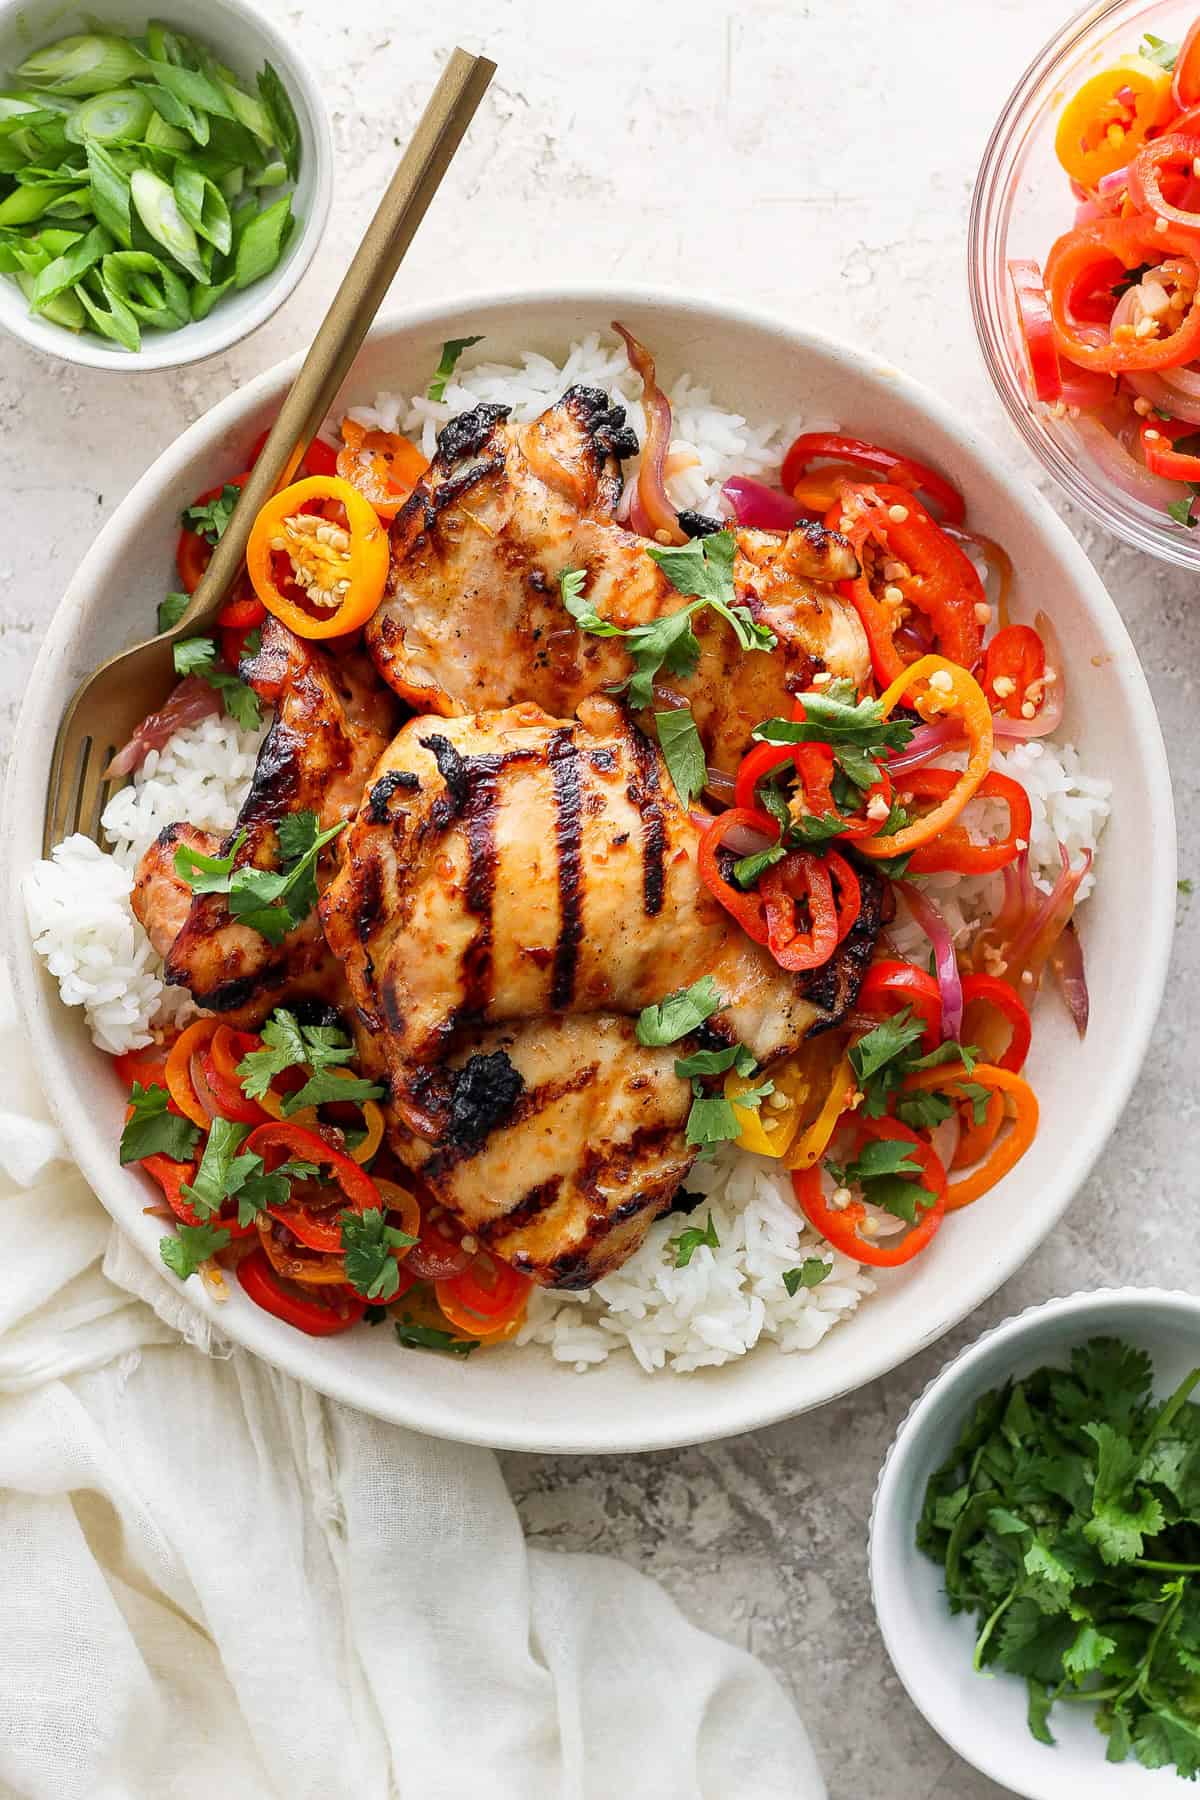 Grilled chicken thighs on a bed of white rice, garnished with sliced bell peppers, onions, and herbs in a bowl, with chopsticks on the side.